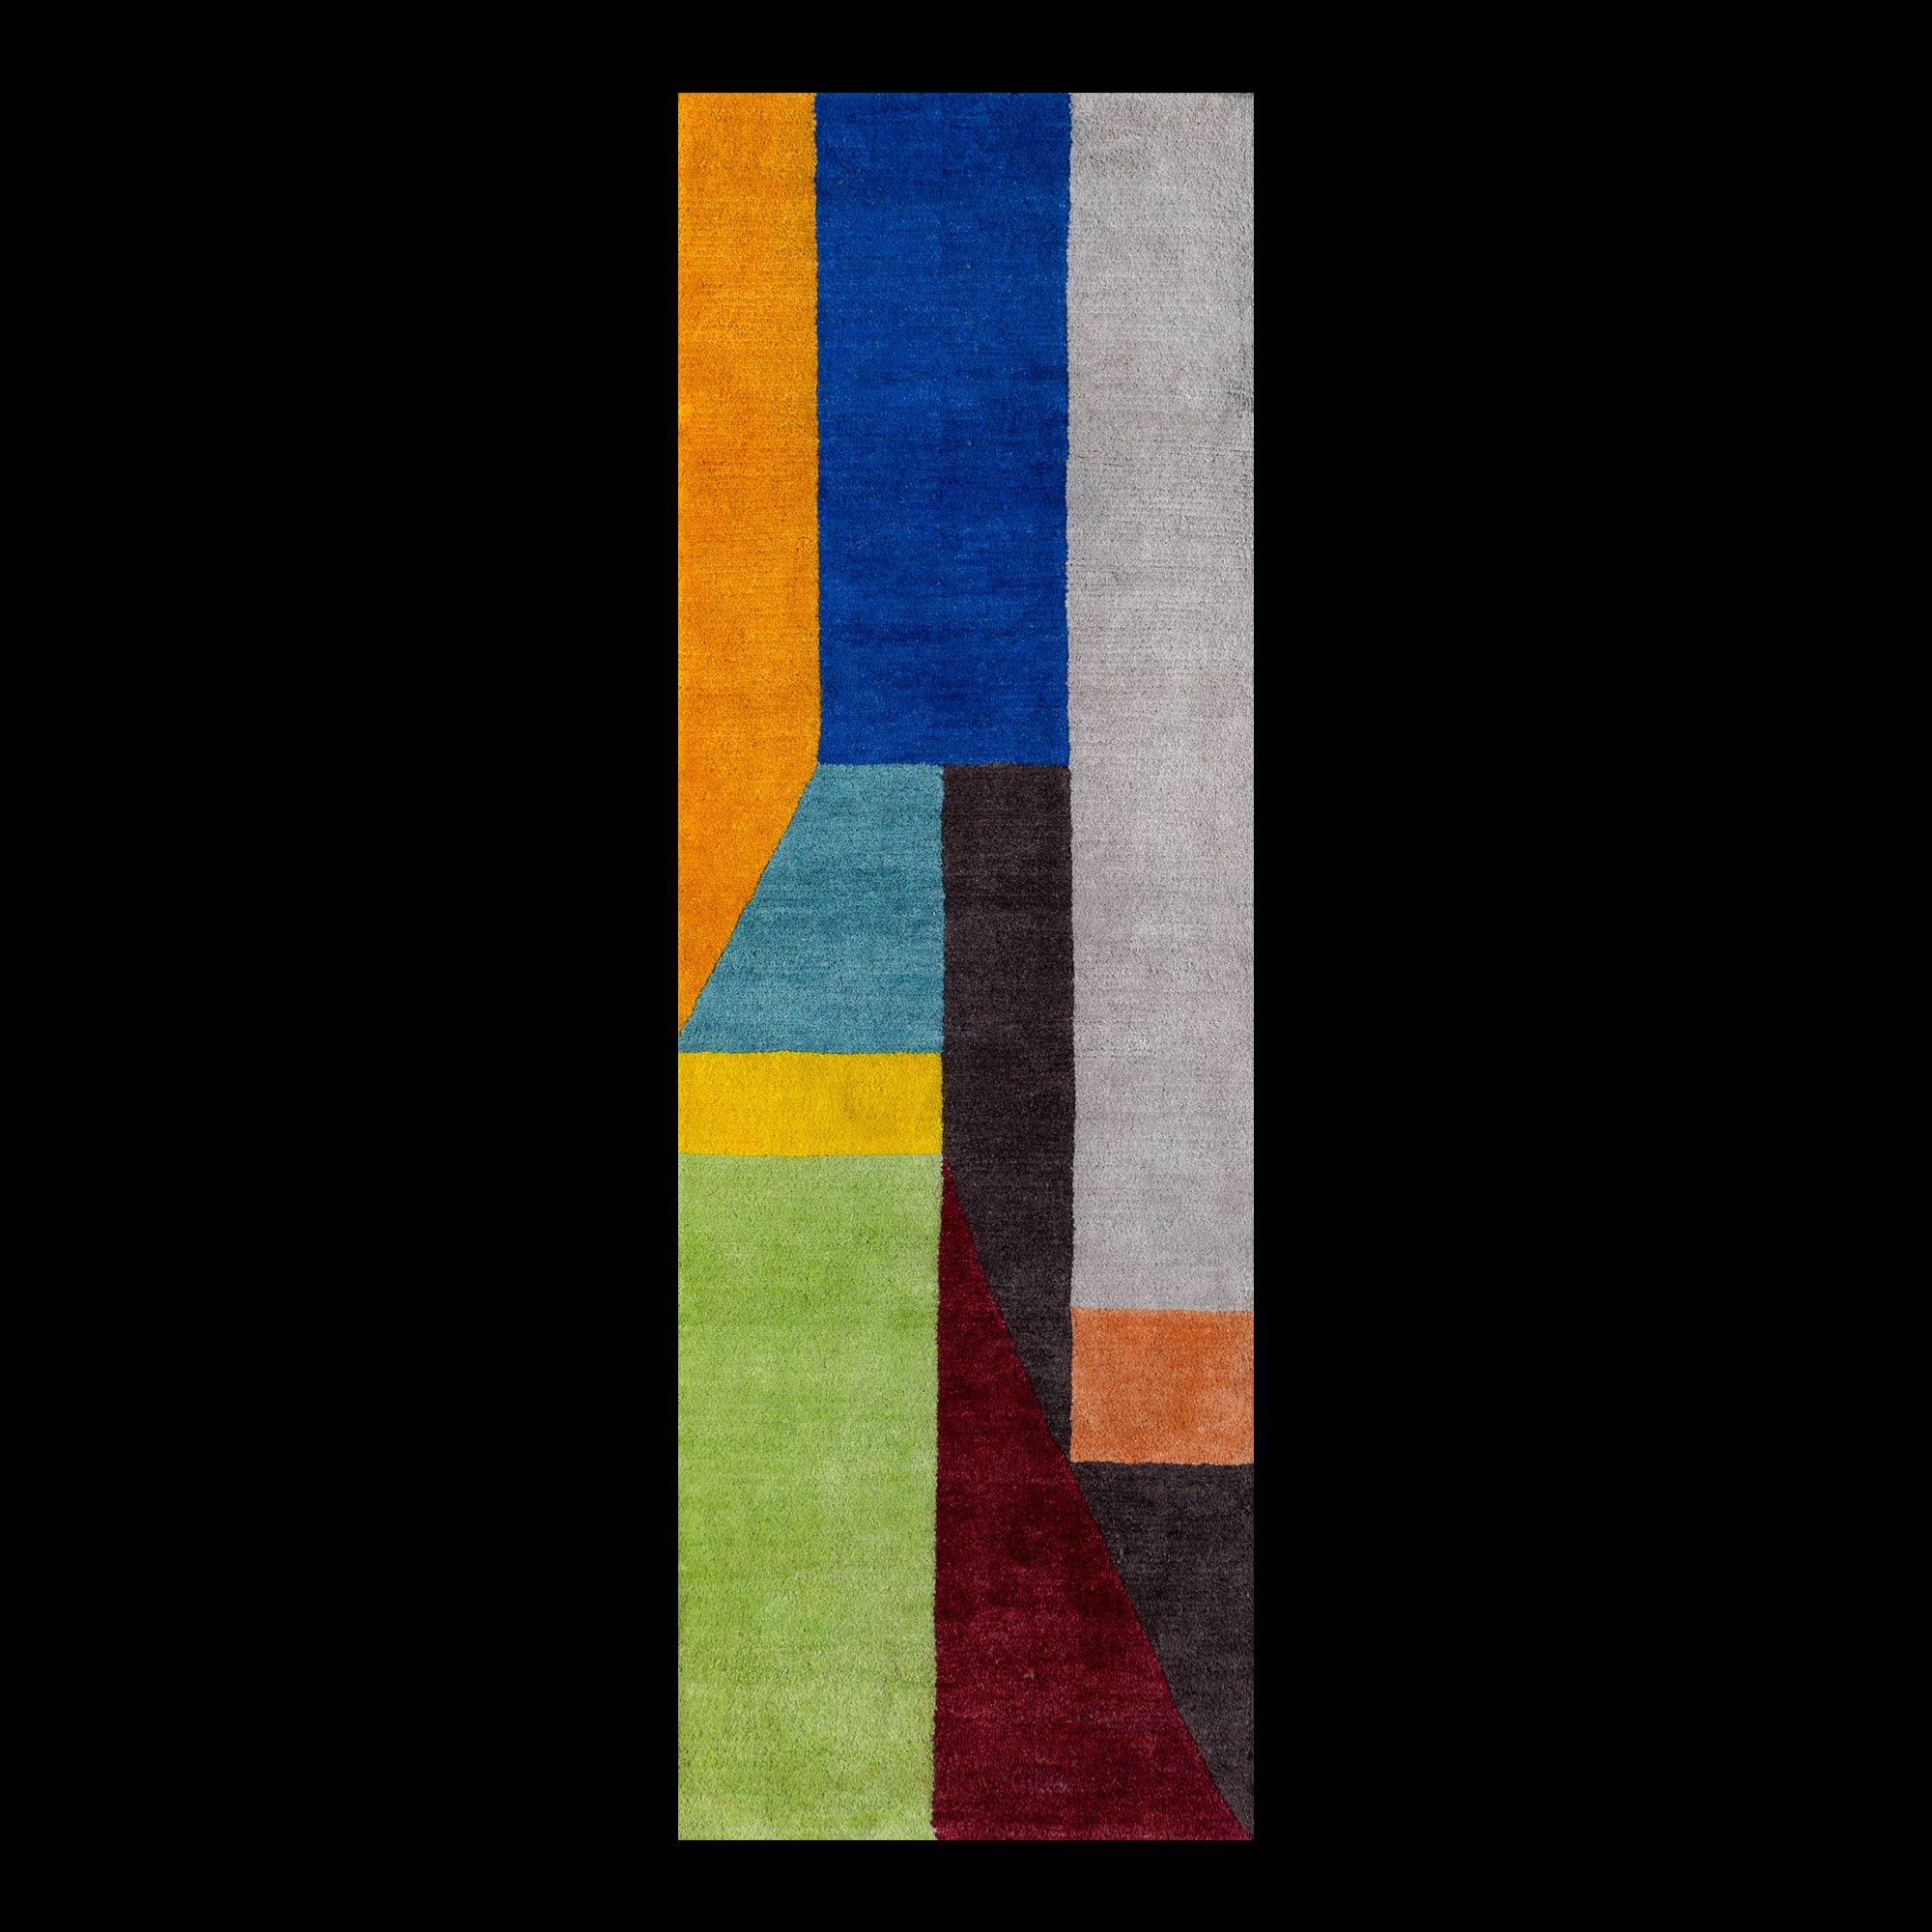 CEM1 woollen carpet by Chung Eun Mo for Post Design collection/Memphis

A woollen carpet handcrafted by different Nepalese artisans. Made in a limited edition of 36 signed, numbered examples.

As the carpet is made by hand, there are slight